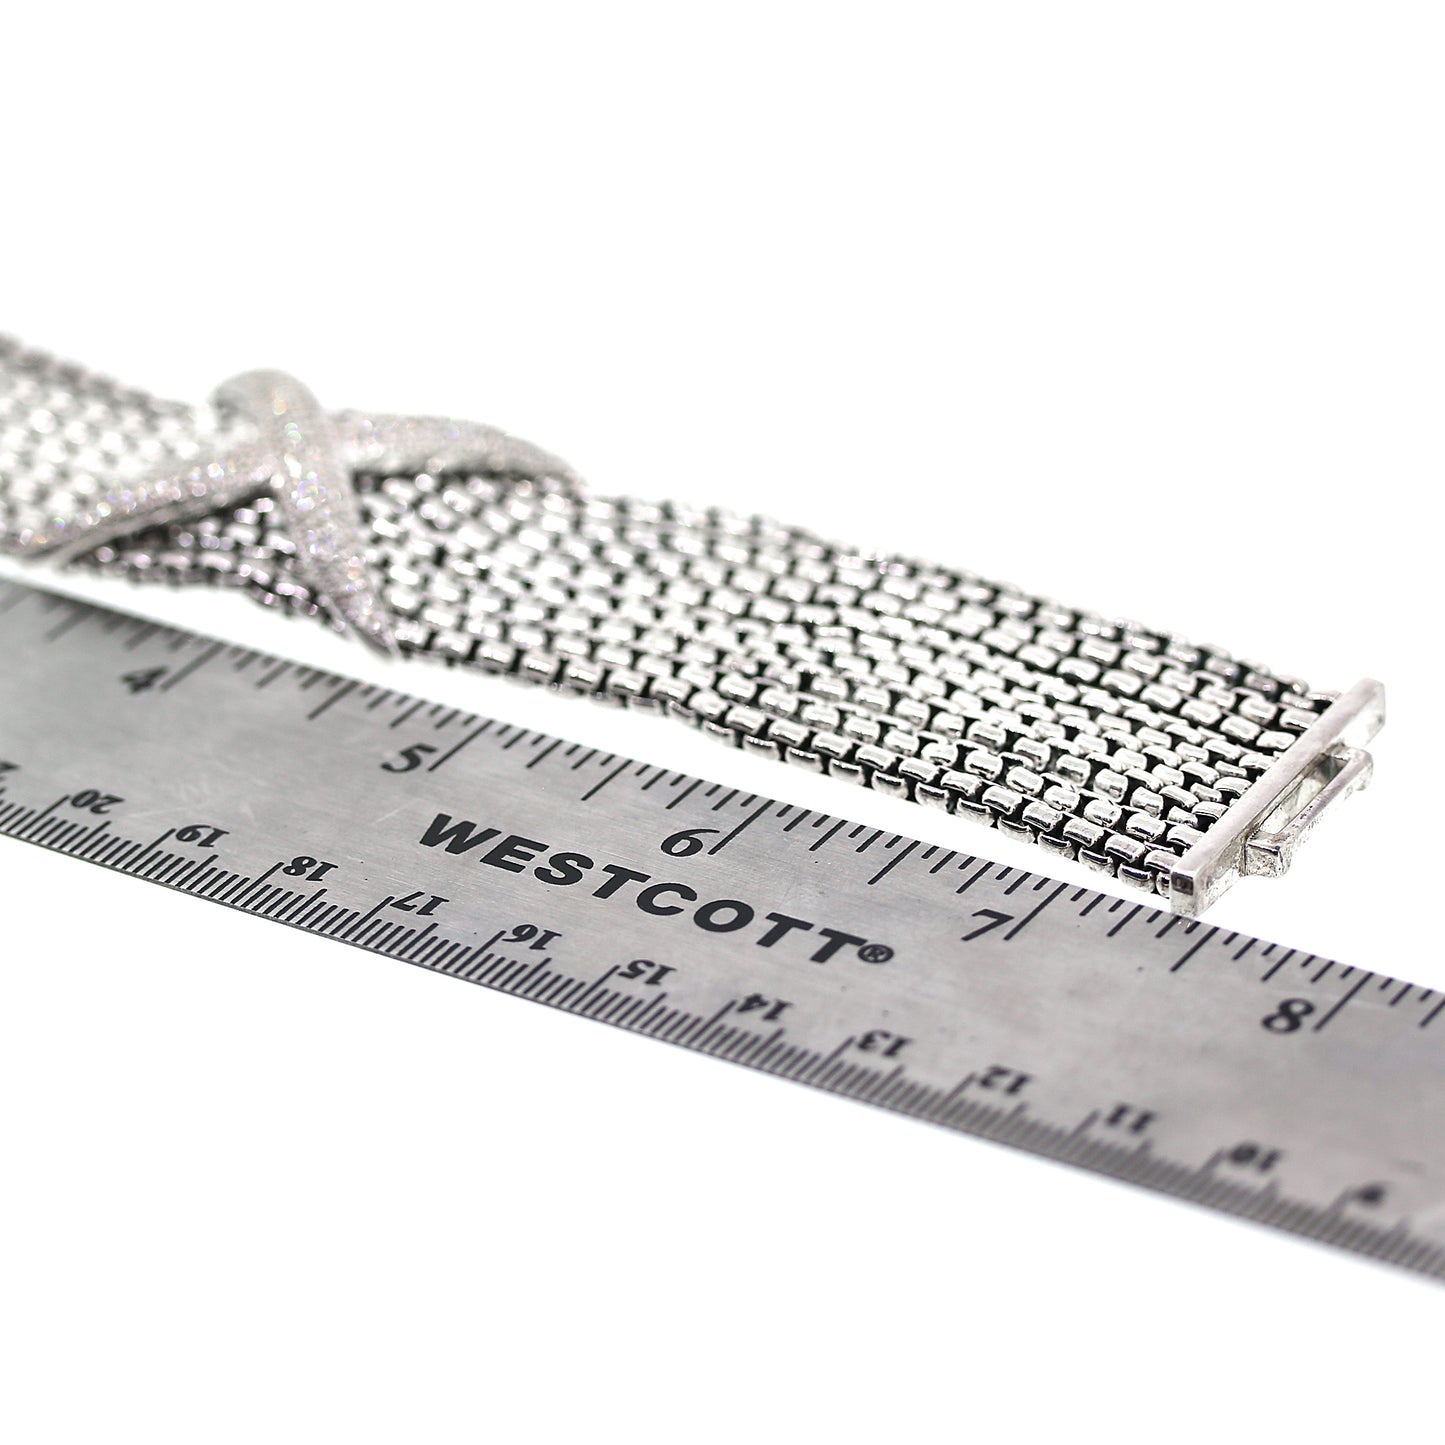 Load image into Gallery viewer, Preowned David Yurman 8 Row Diamond X Bracelet in Sterling Silver
